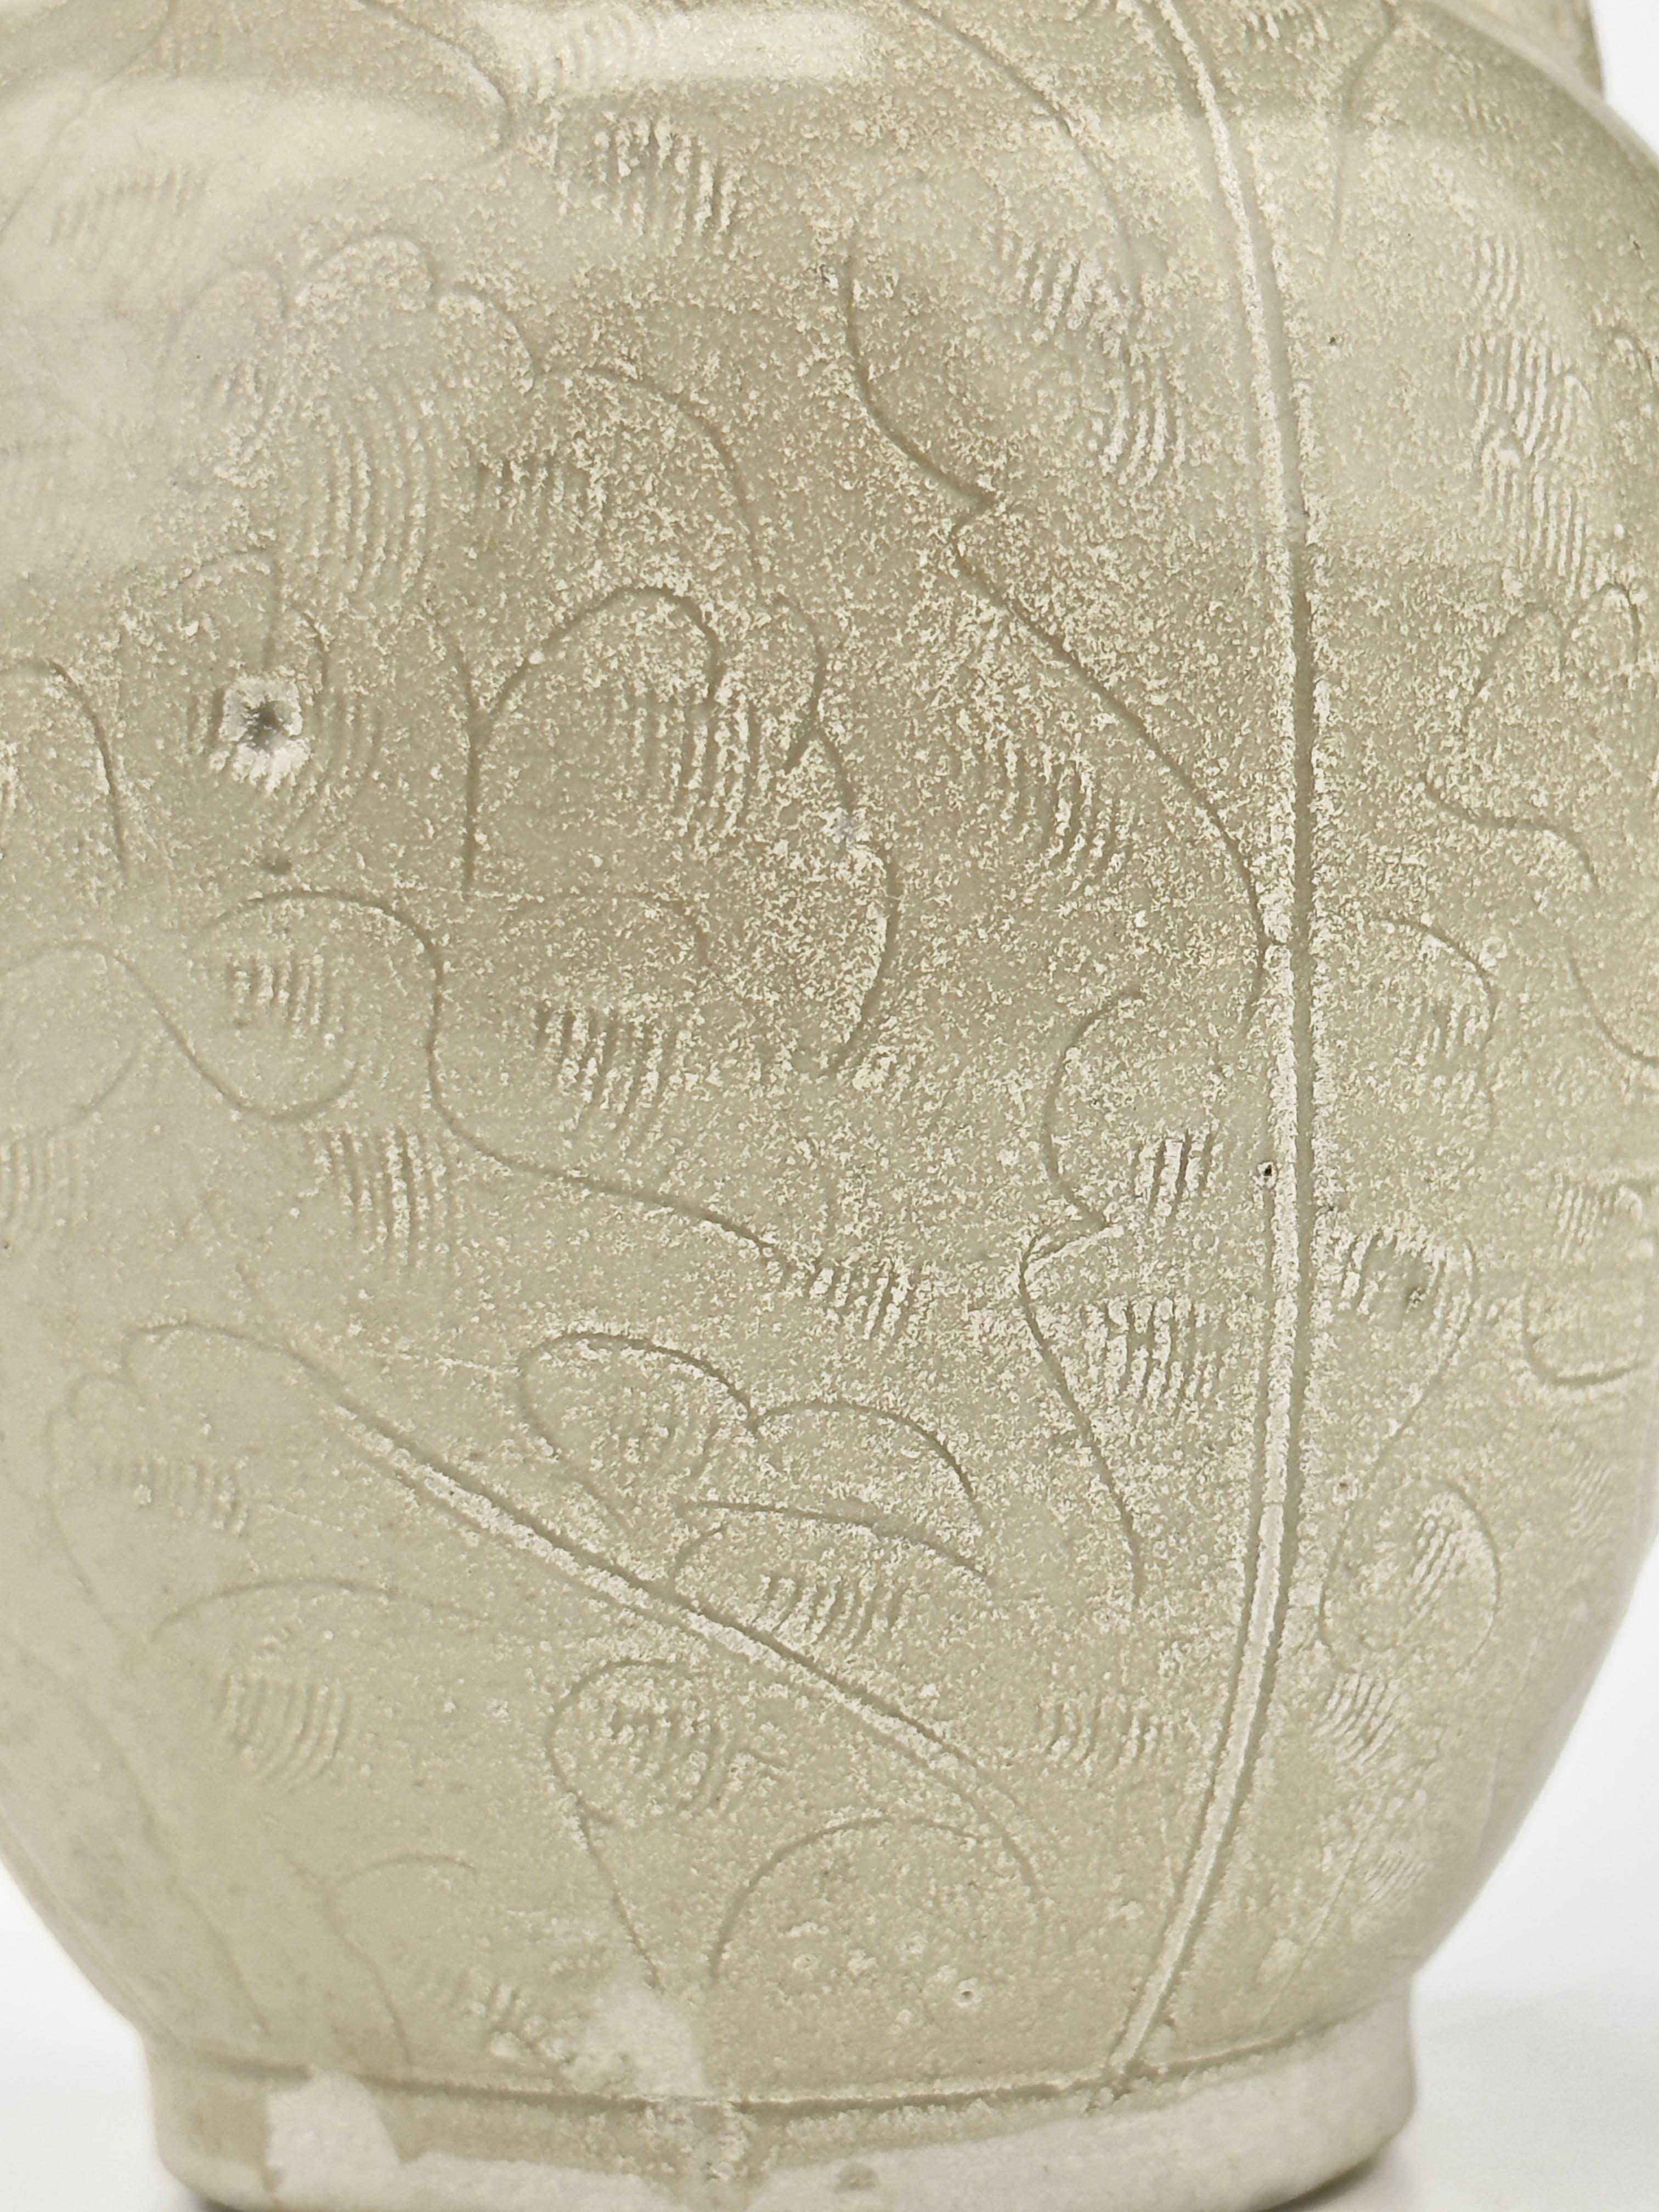 Qingbai Melon form water ewer, Northern song dynasty For Sale 2